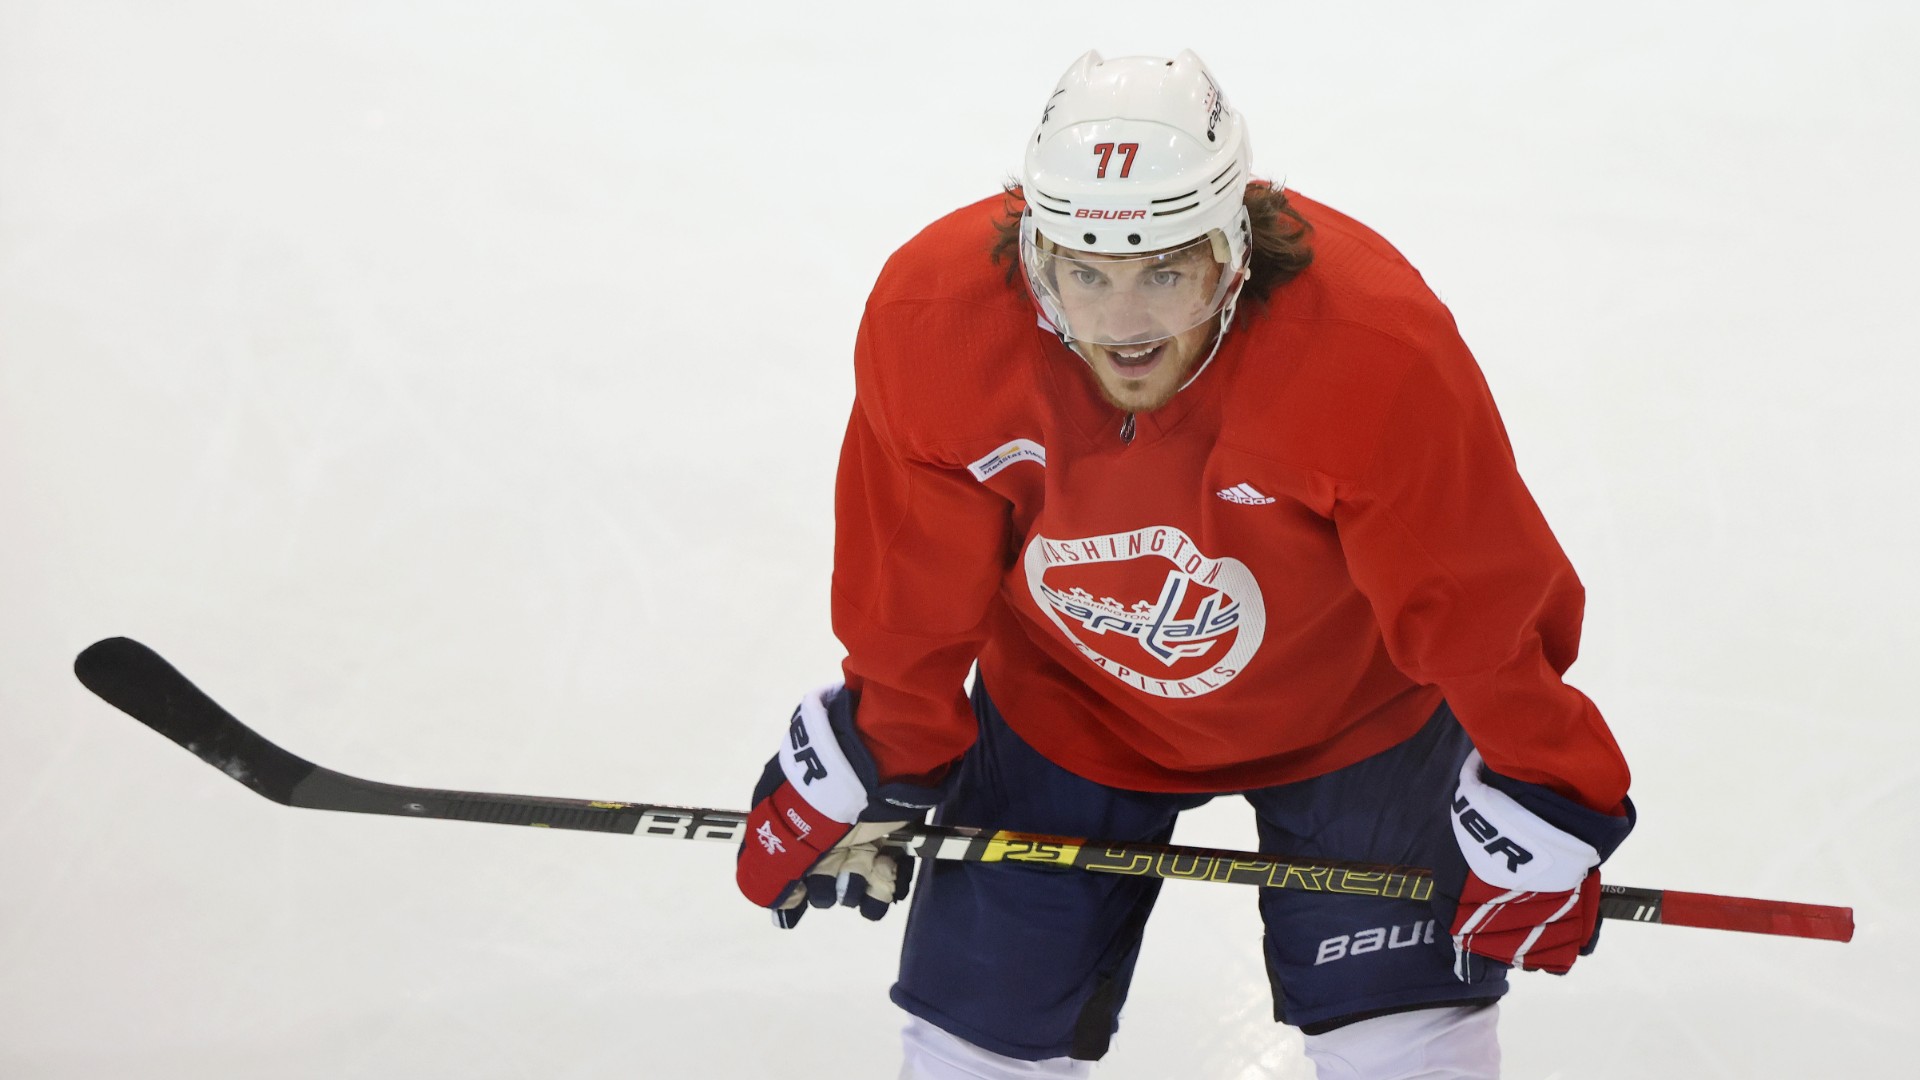 T.J. Oshie Shows You Don't Always Have to Have a Letter on Your Chest to Be a Leader